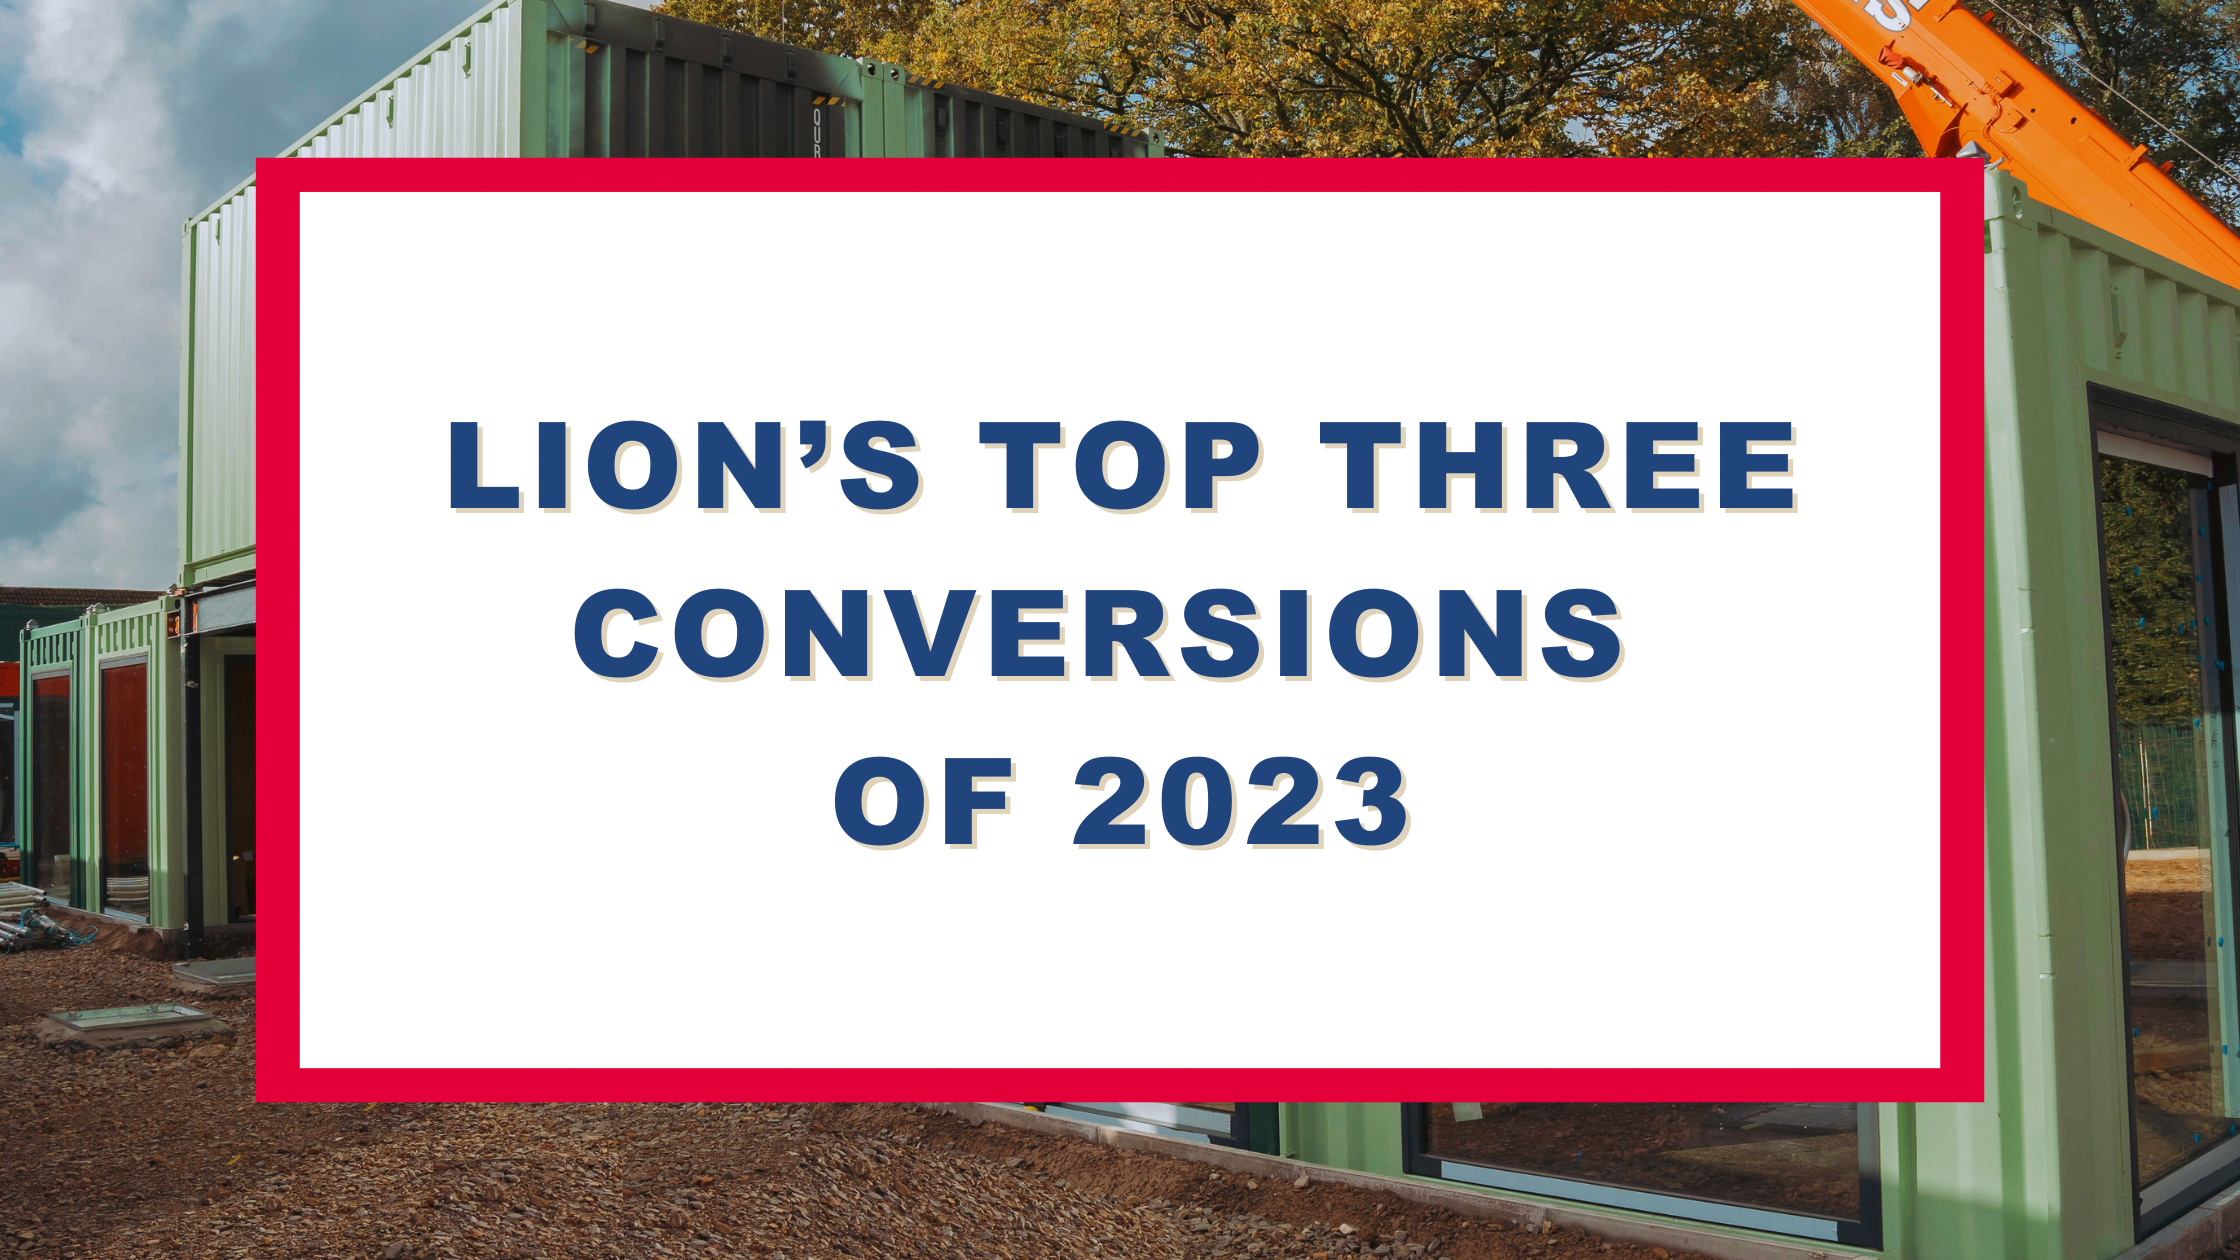 Lion's Top Three Conversions of 2023